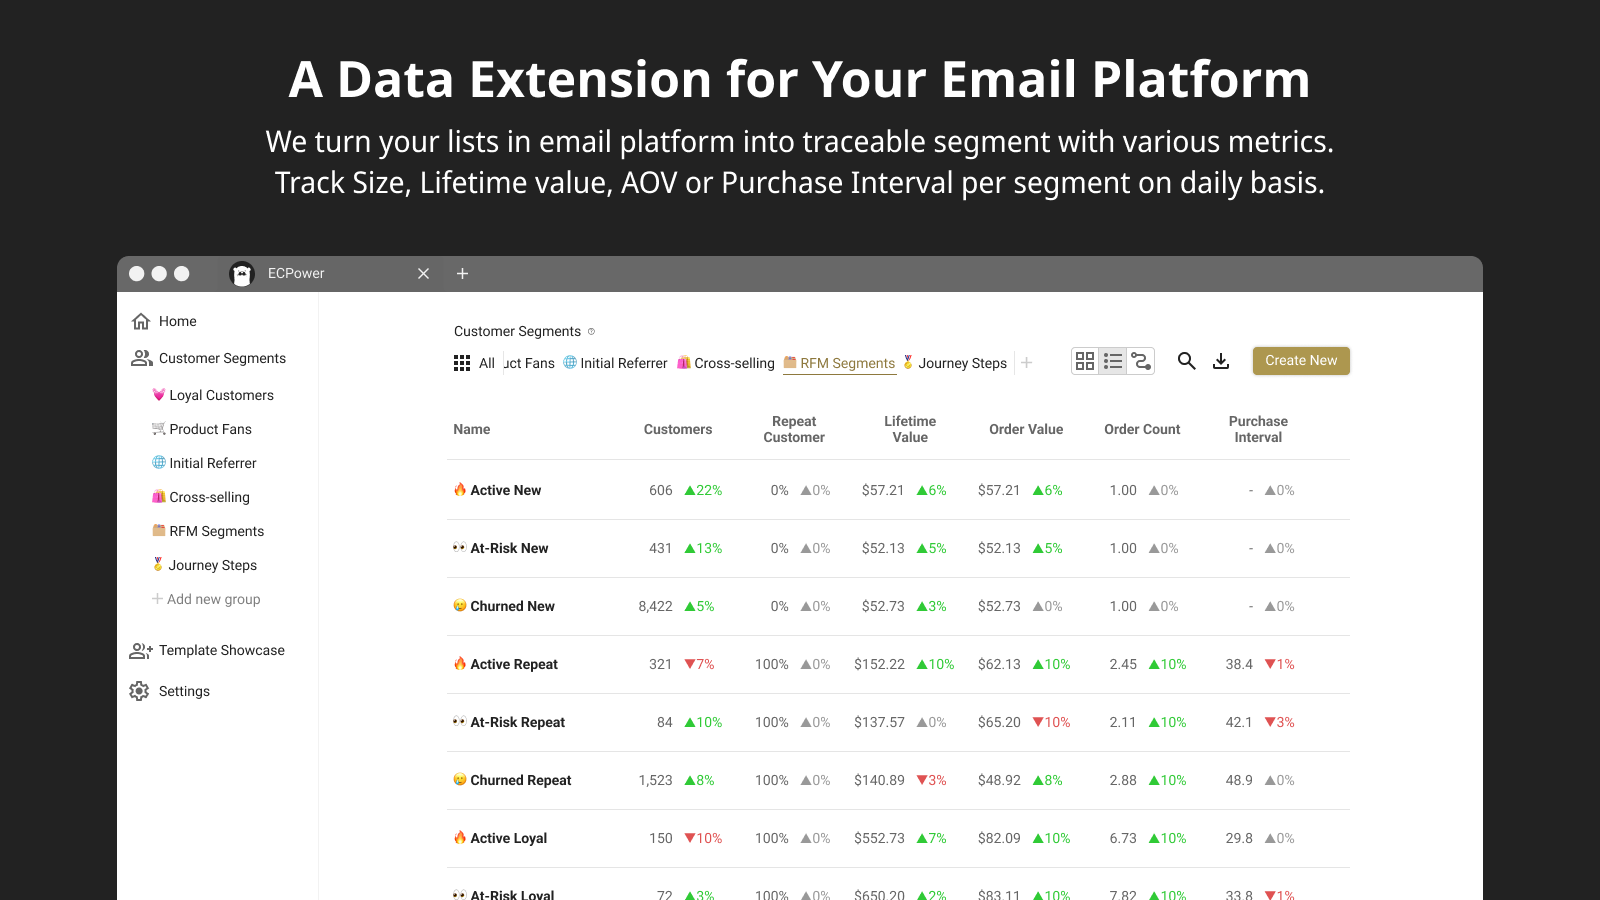 A Data Extension for Your Email Platform